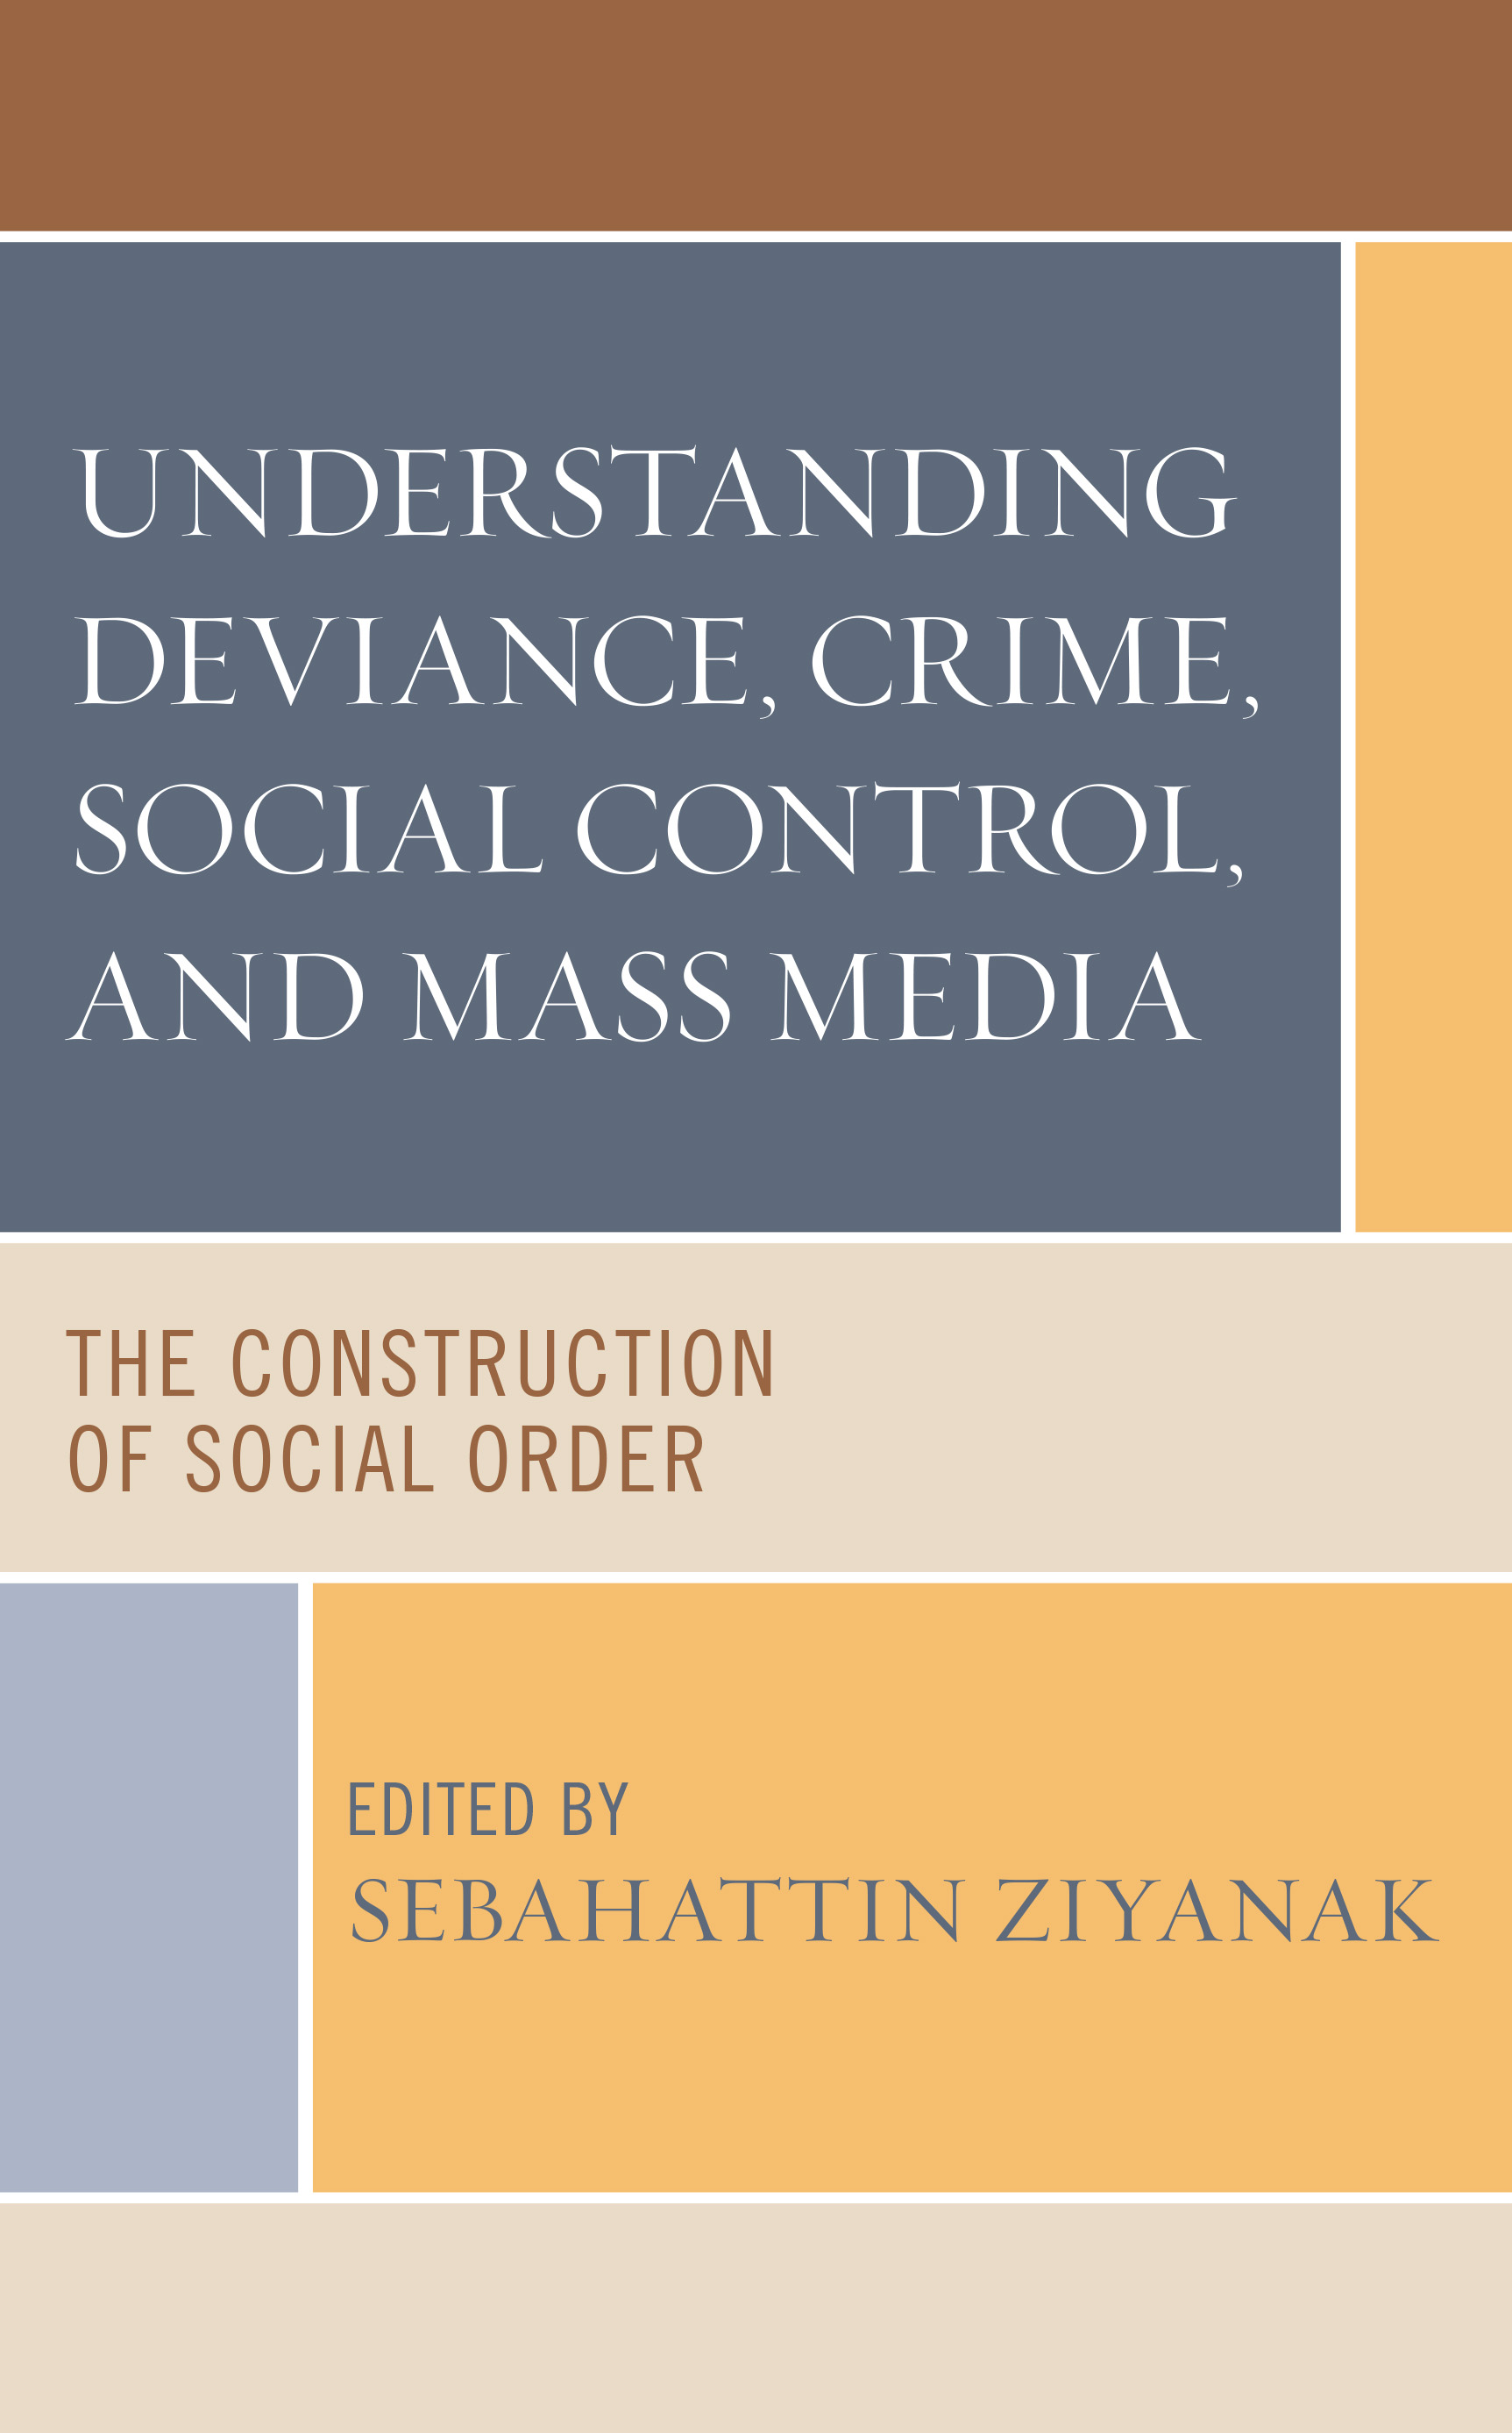 Understanding Deviance, Crime, Social Control, and Mass Media: The Construction of Social Order